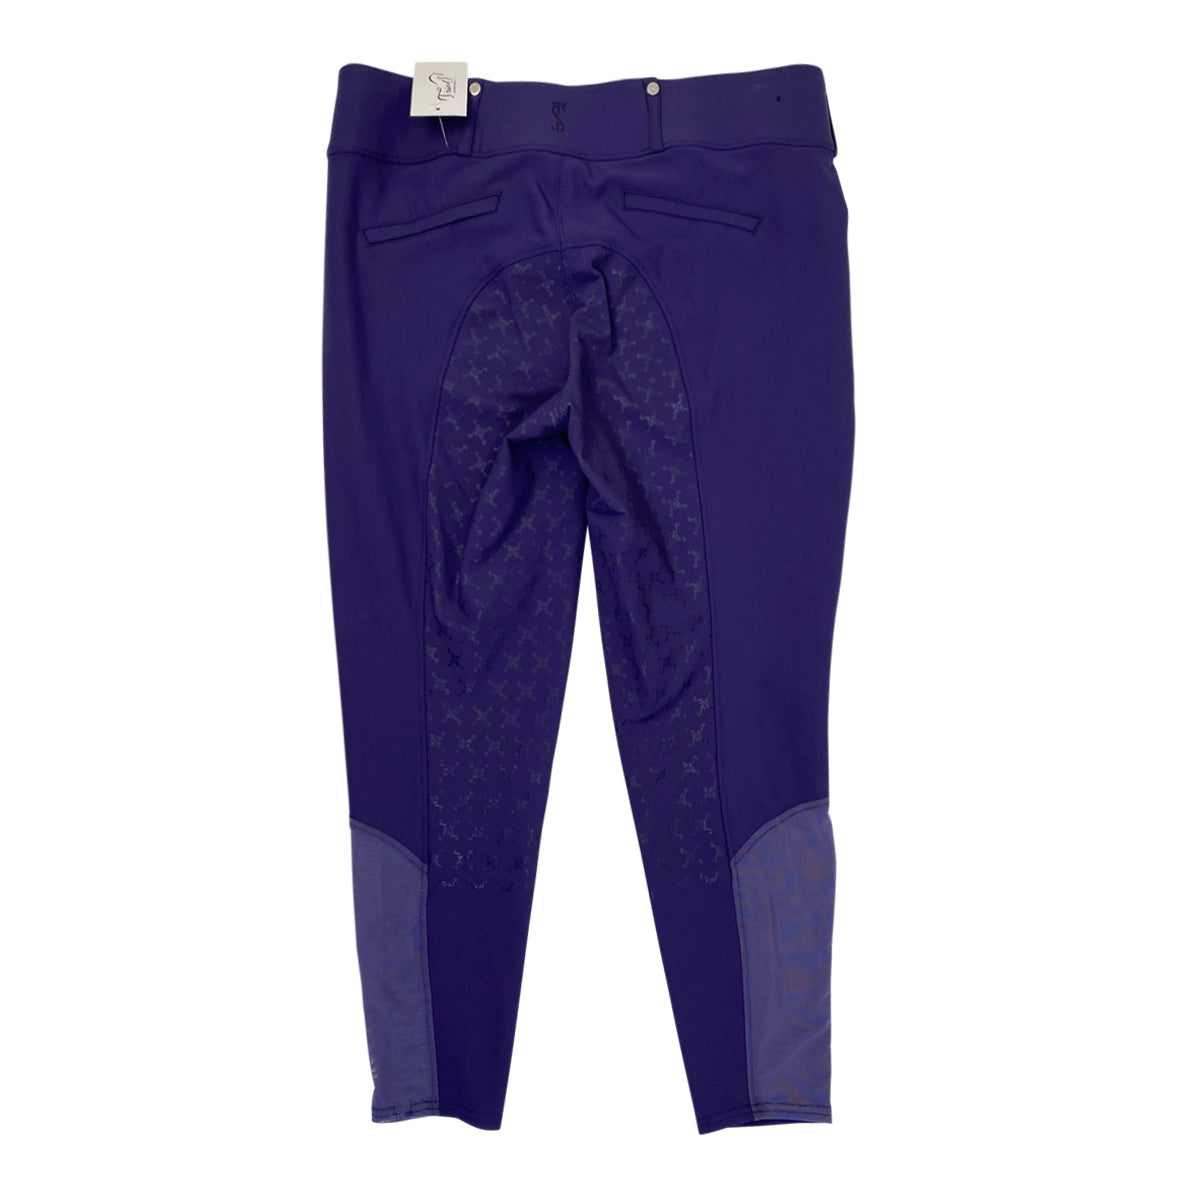 Tredstep Symphony "Evolute" Breeches in Concord